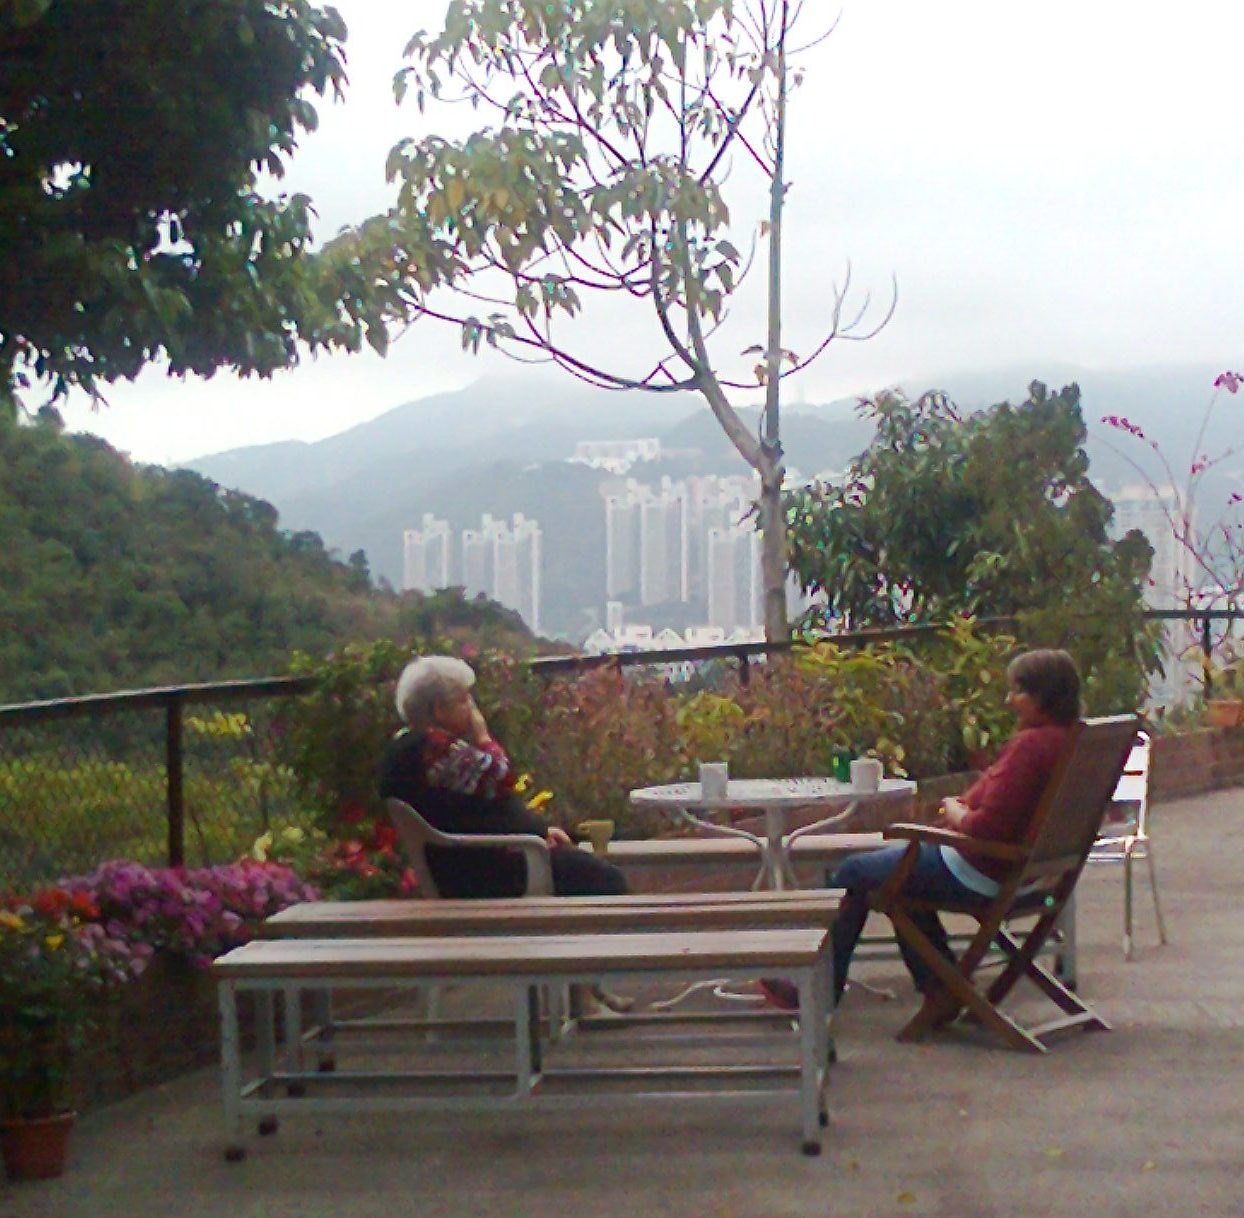 Lesley and another woman are seated facing each other on a terrace. Coffee mugs are on the table between them. In the background are the hills and skyscrapers of Hong Kong. Colourful flowers in planter boxes grow beside a fence